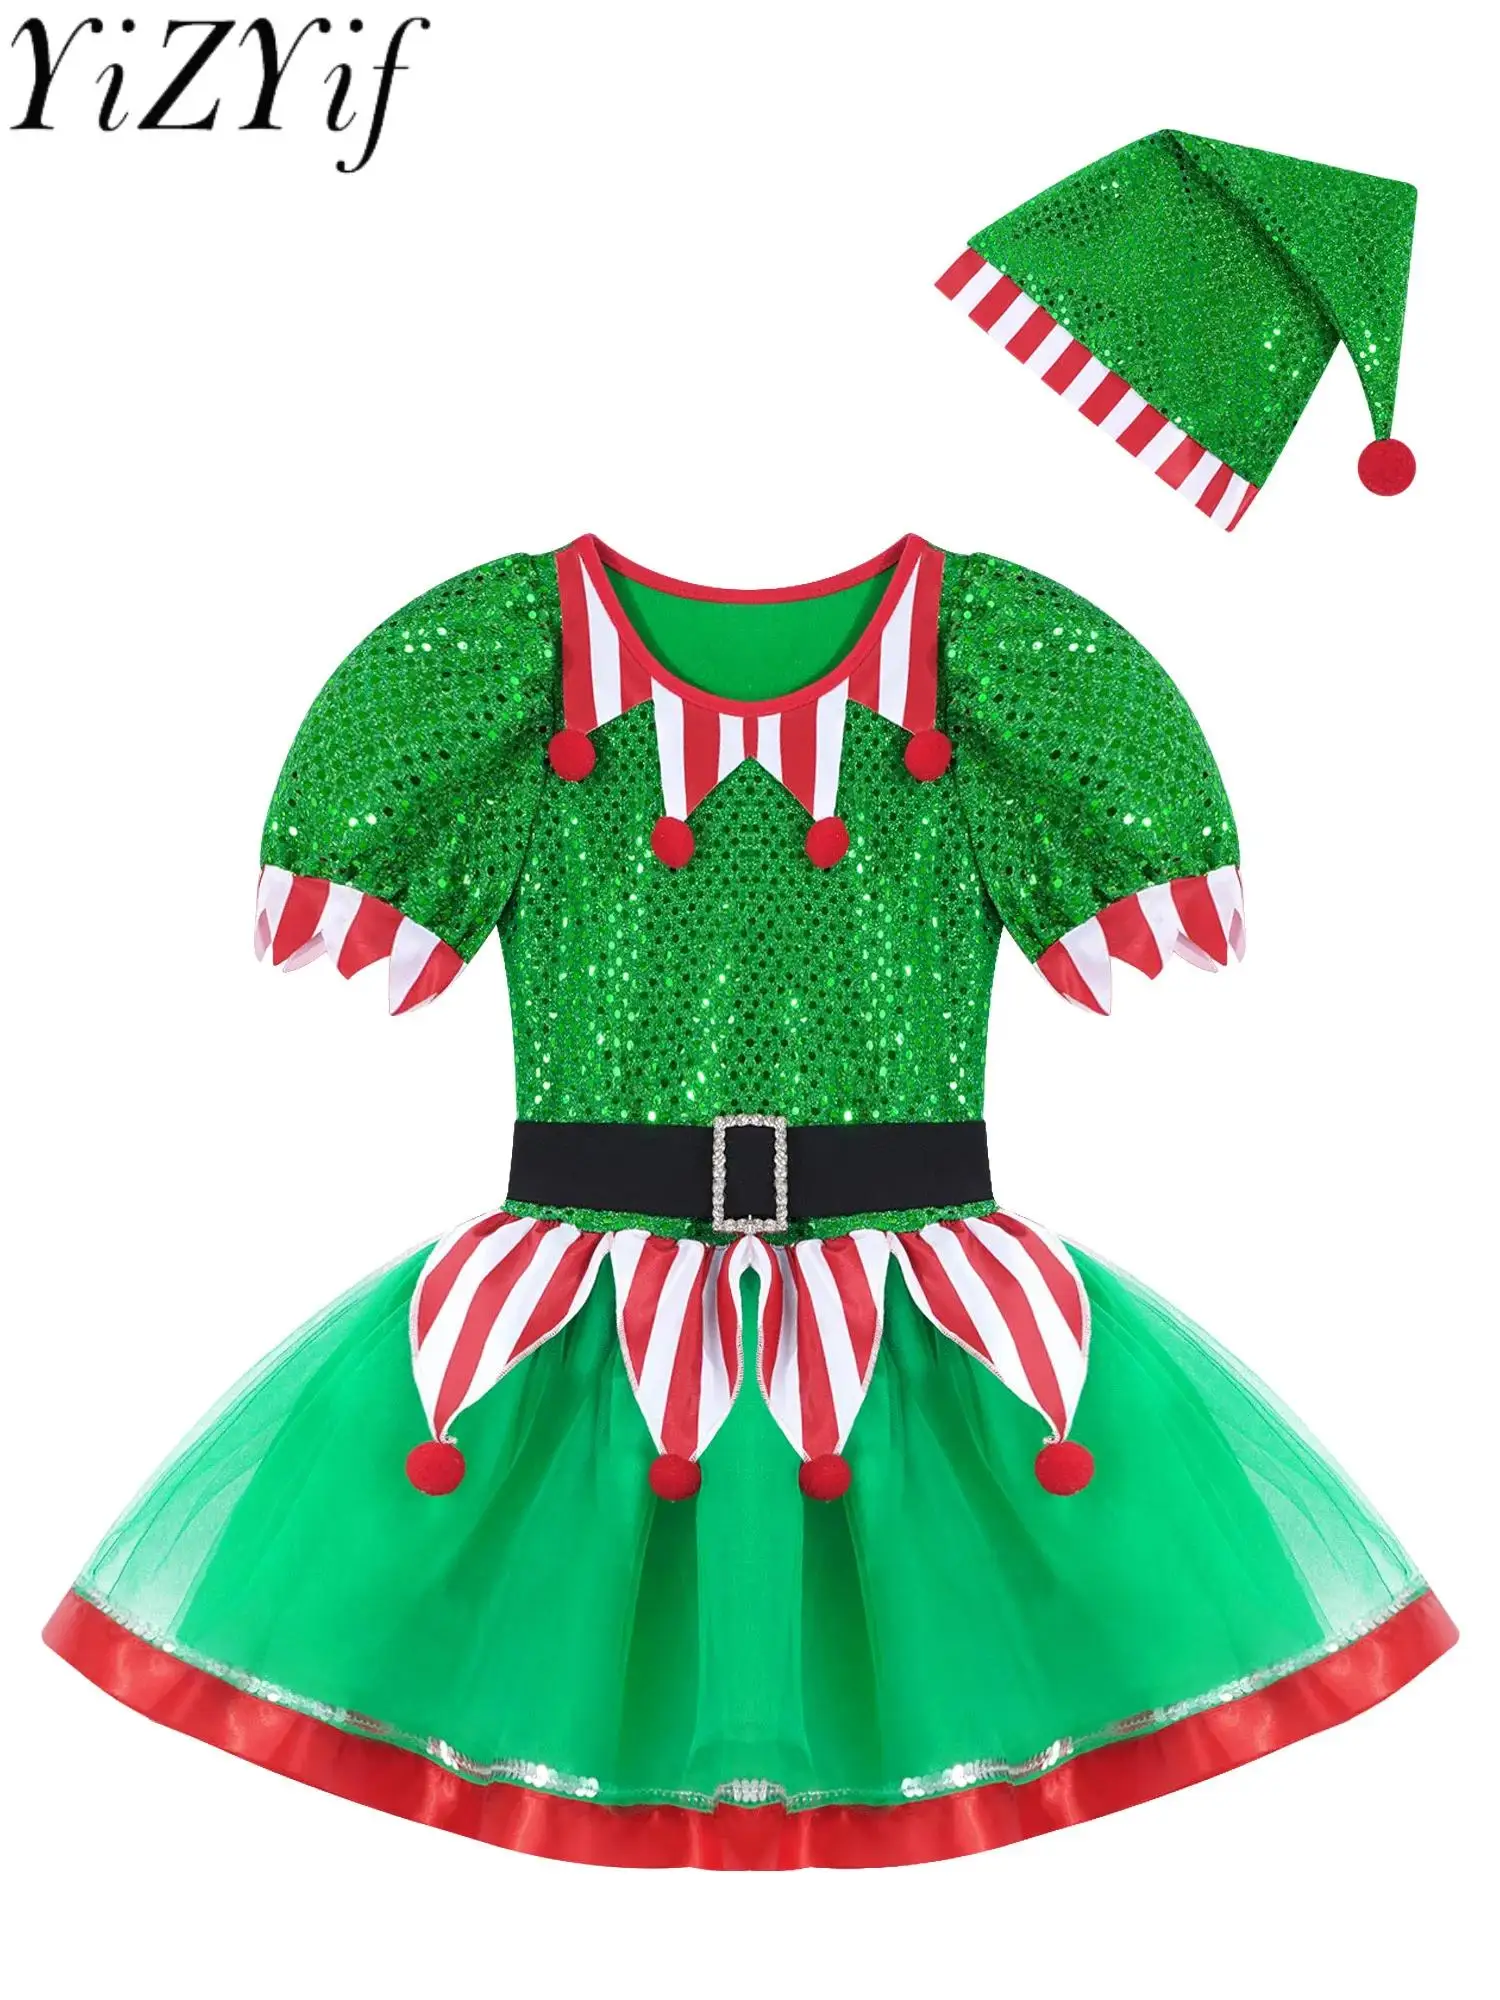 

Kids Girls Christmas Elf Costume Holiday Xmas Sequins Pompoms Adorned Fancy Party Mesh Tutu Dance Dress with Hat for New Year